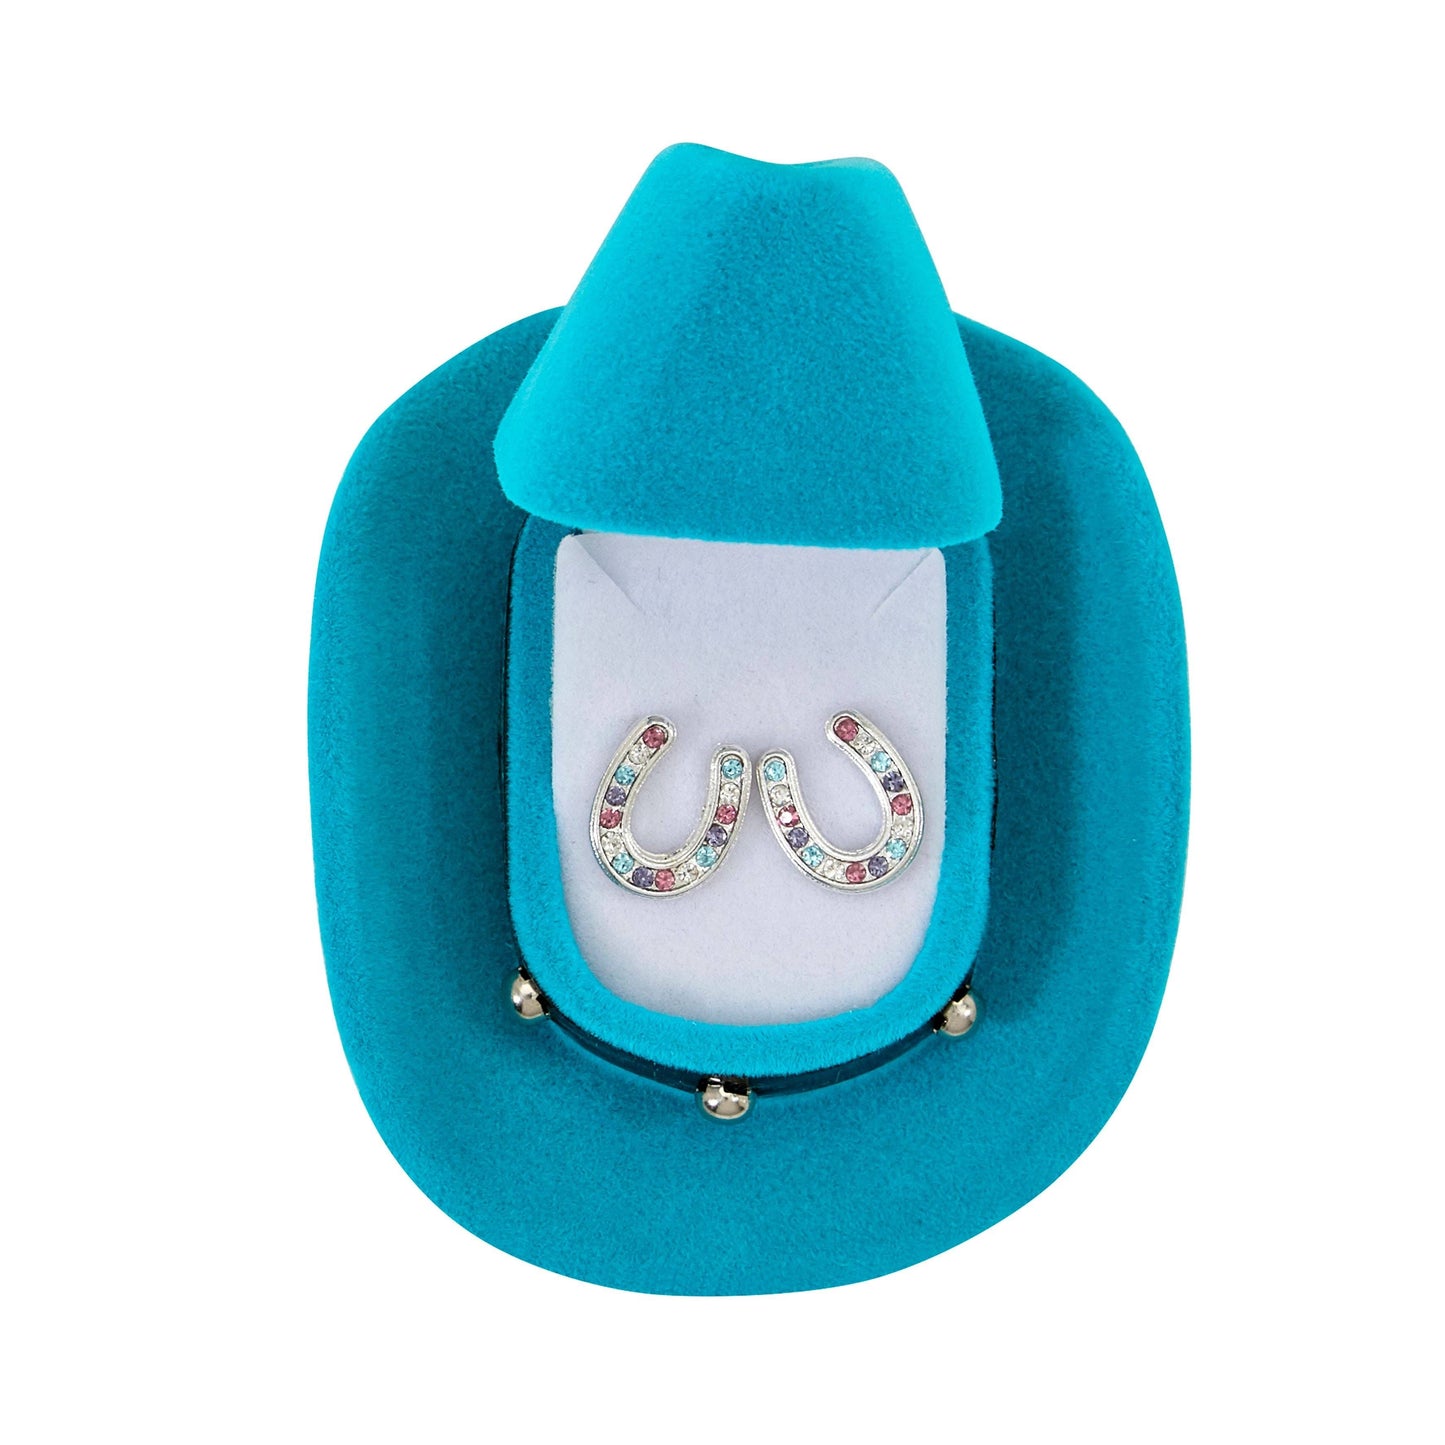 AWST Int'l Multicolored Horseshoes Earrings w/Colorful Cowboy Hat Box